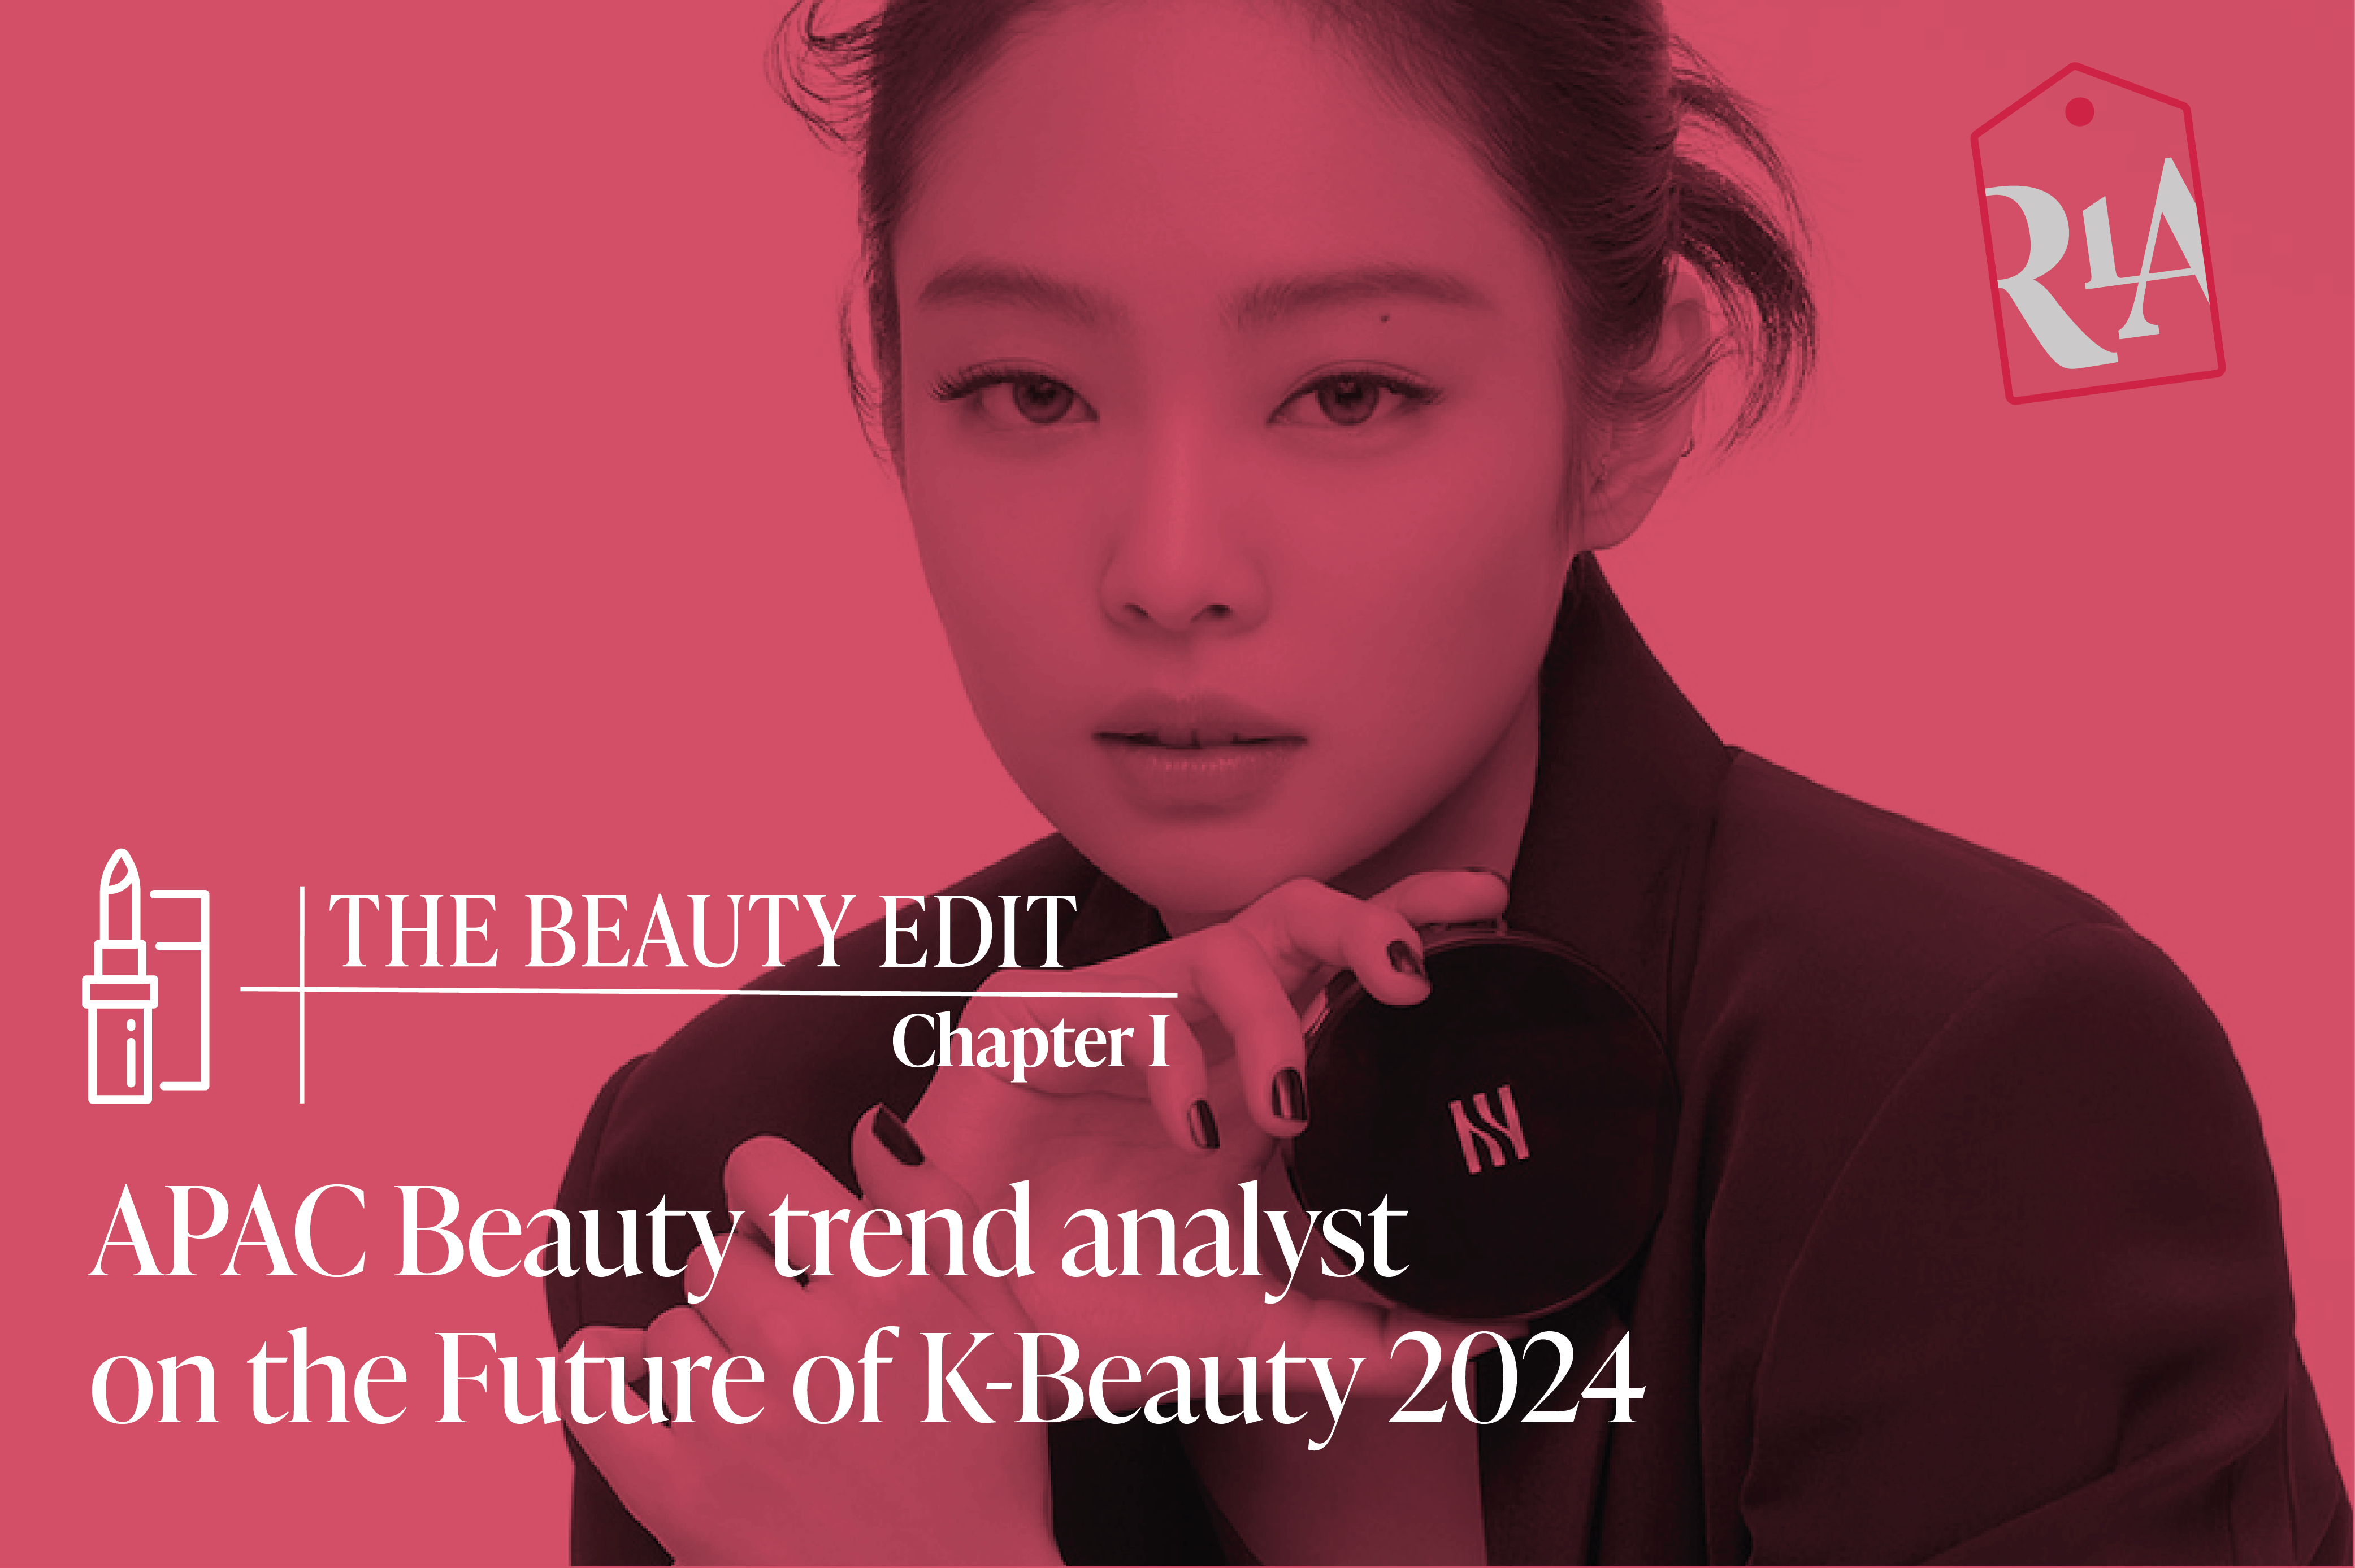 12 Game-Changing Korean Beauty Trends For 2021